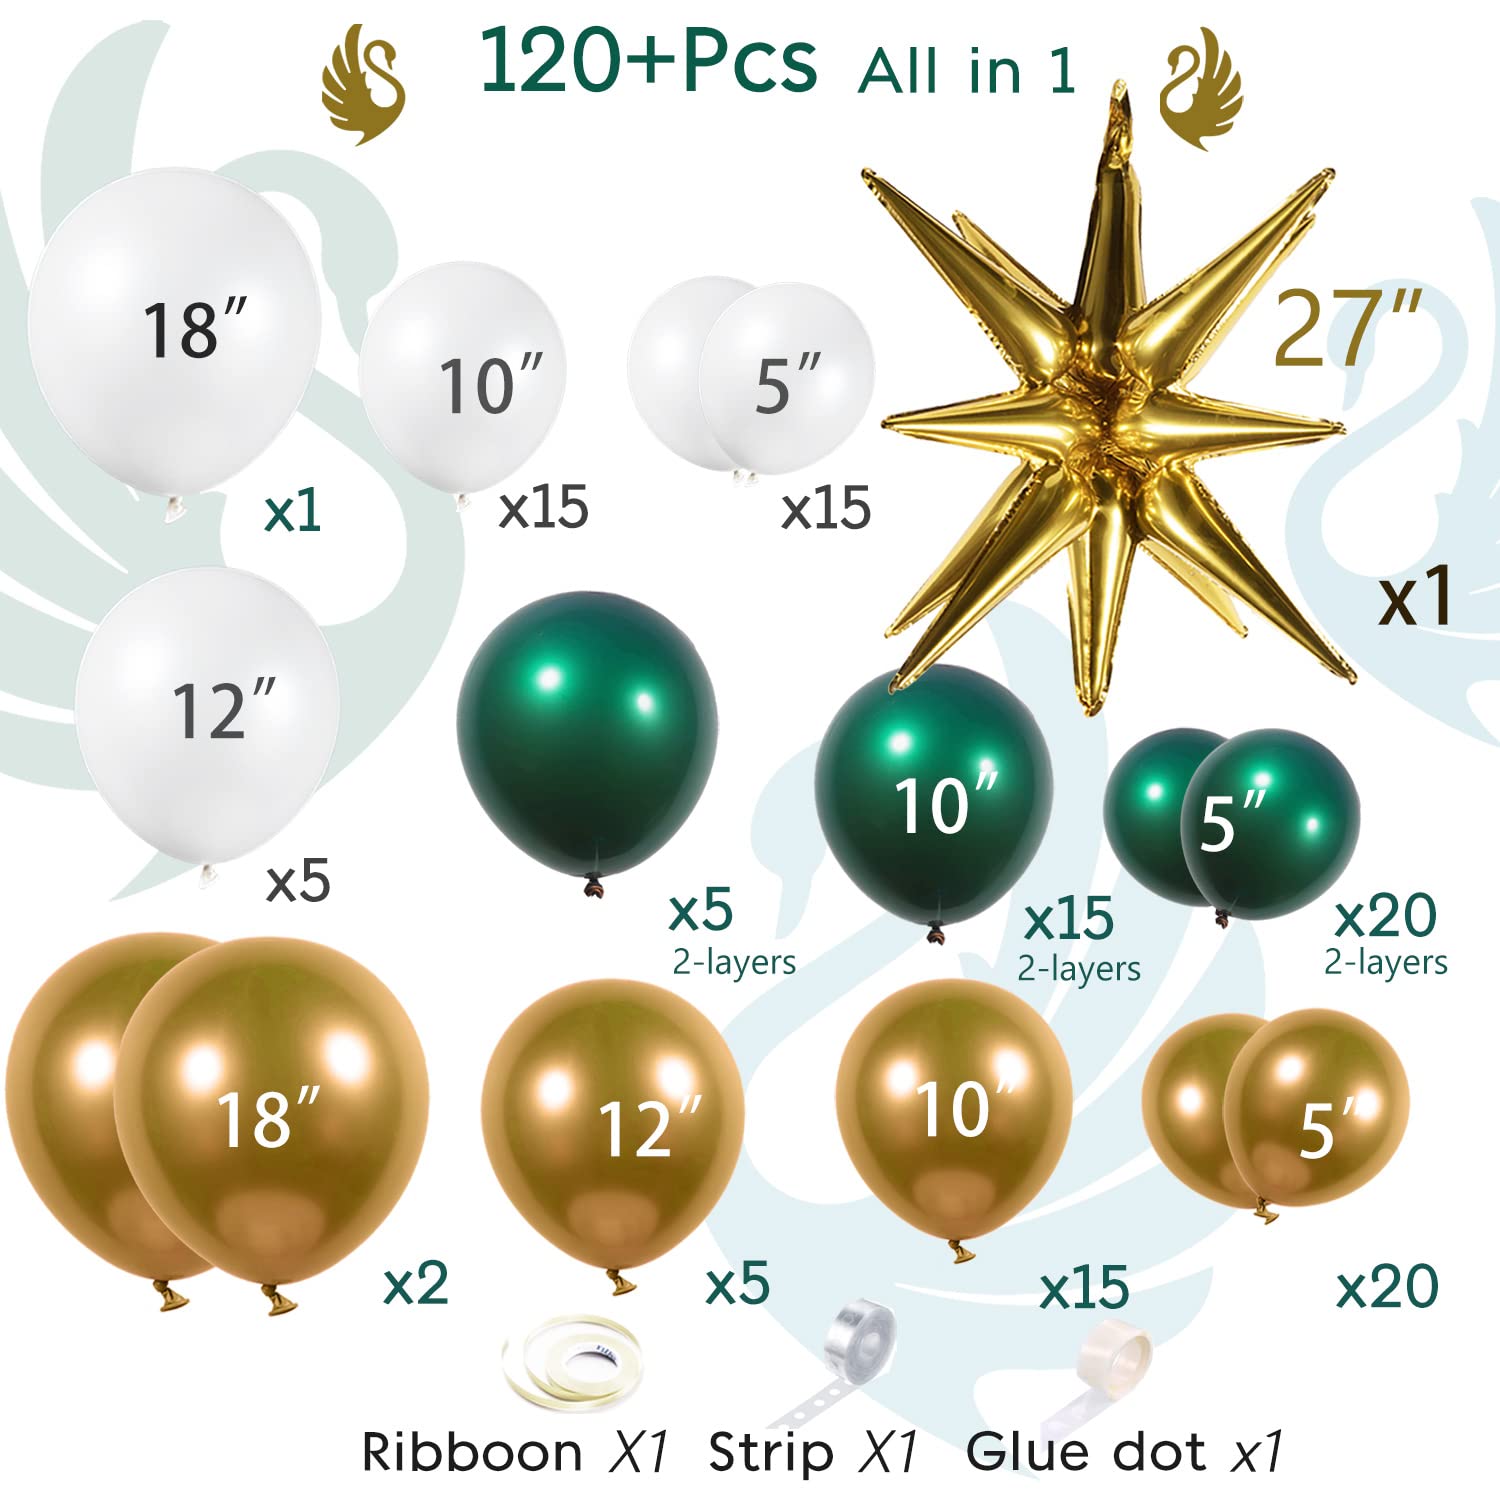 Emerald Green and Gold Balloon Garland Arch Kit 123pcs Double Stuffed Chrome Teal Green Starburst Balloon for luxury Emerald Gold wedding Birthday anniversary graduations Prom Decorations